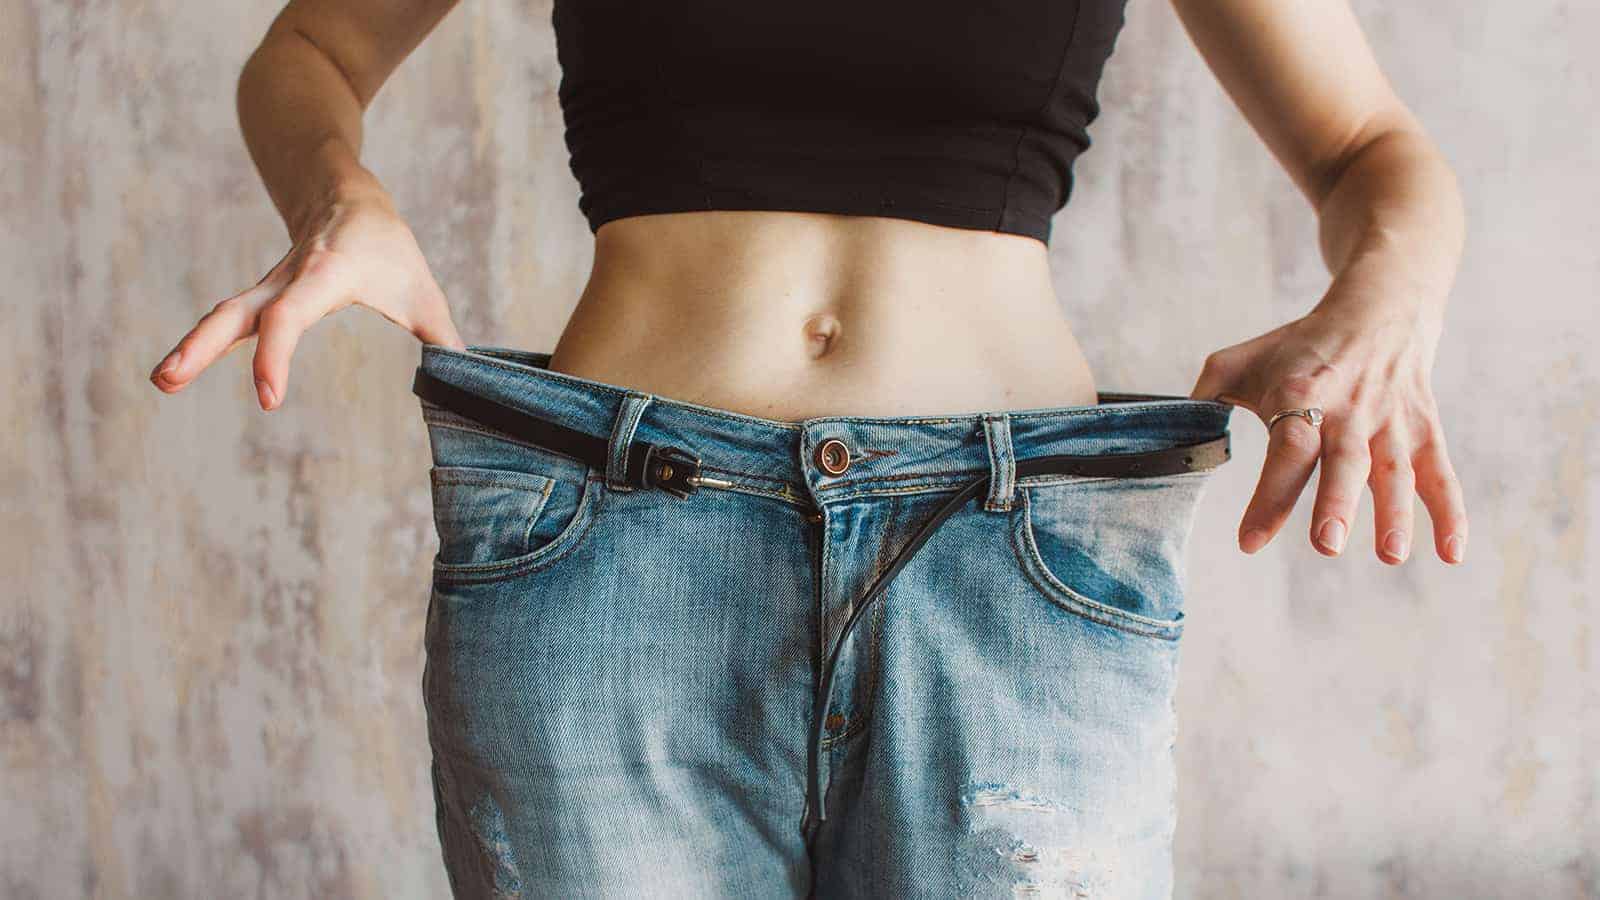 Unexplained Weight Loss May Reveal These 10 Things, According to Science